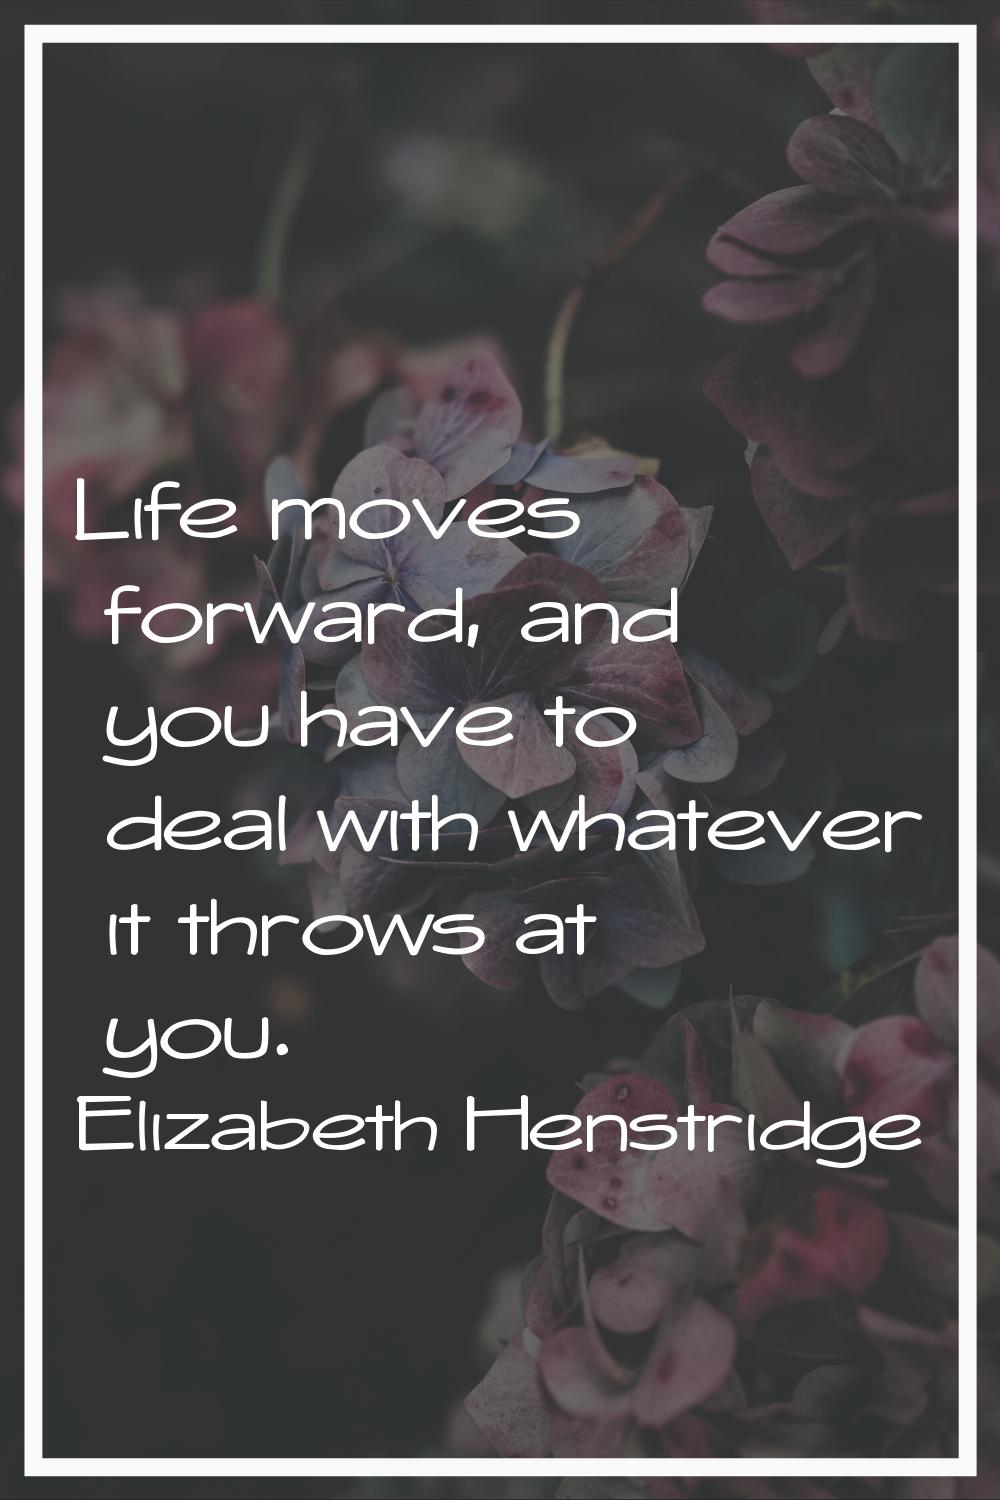 Life moves forward, and you have to deal with whatever it throws at you.